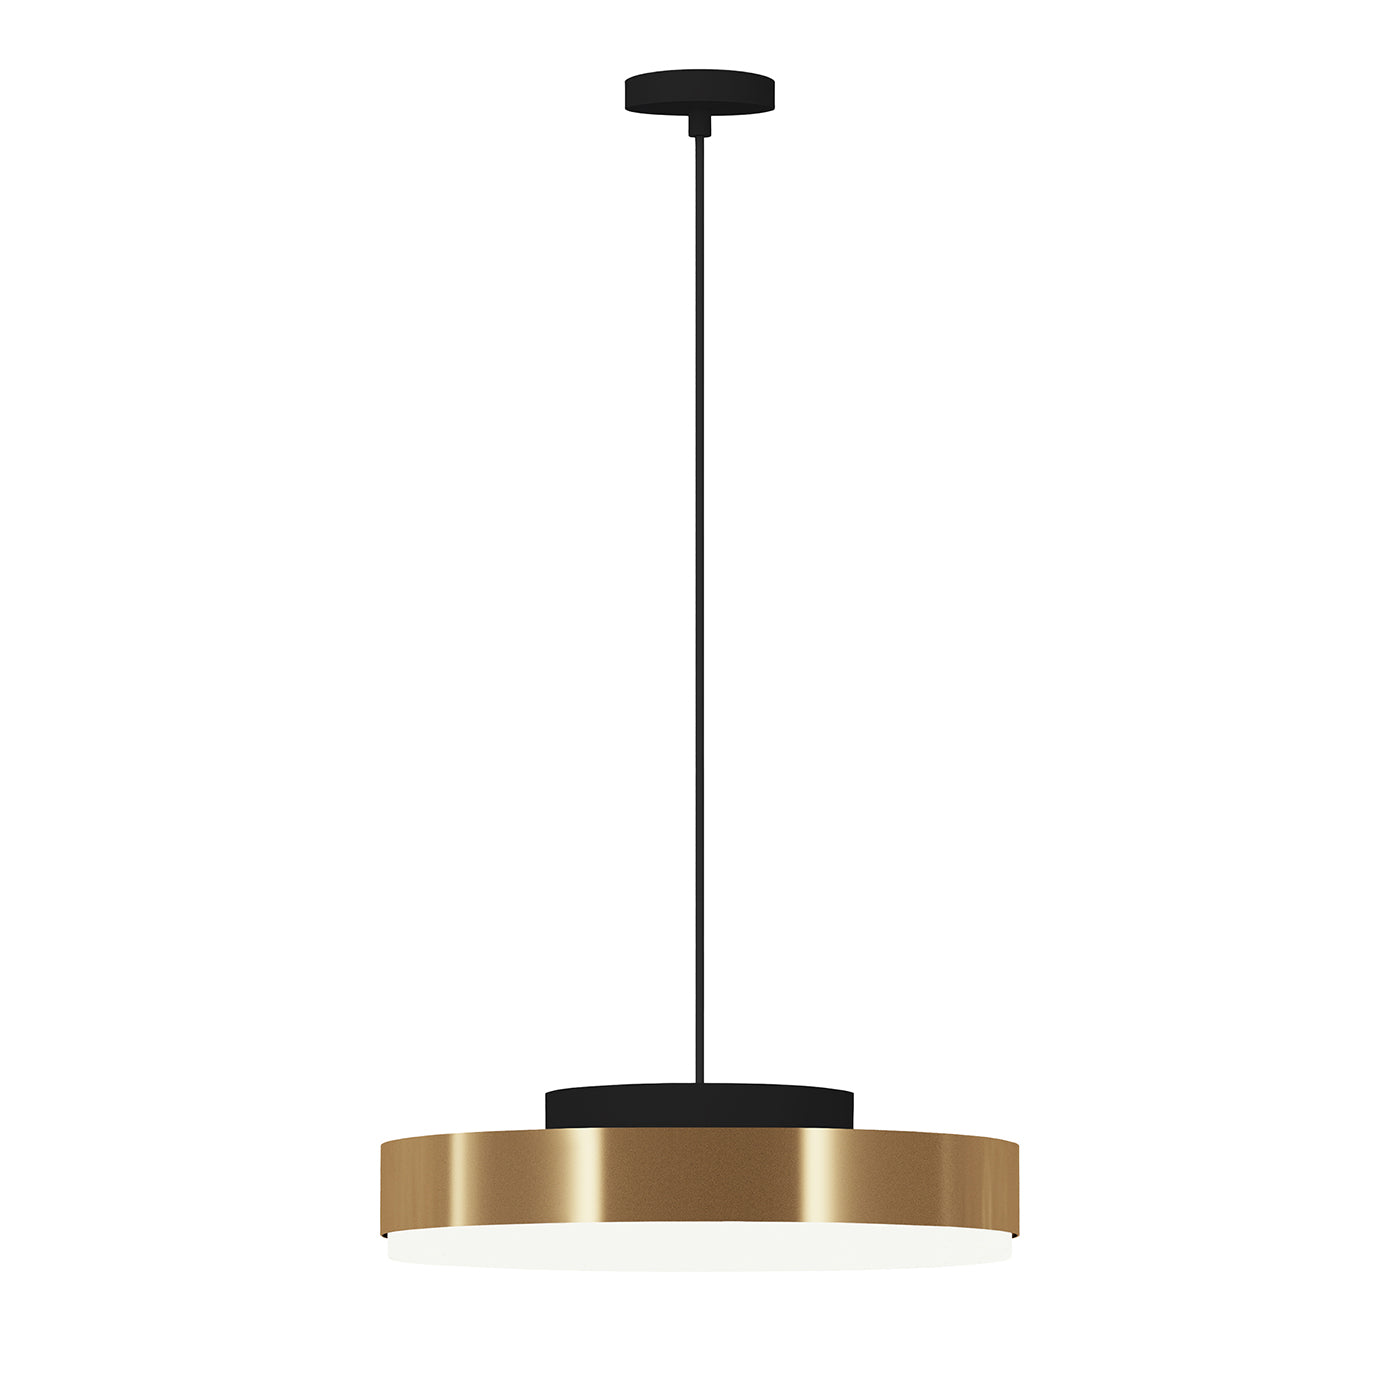 Discus SO Large Brass & Black Pendant Lamp by MKV Design - Main view